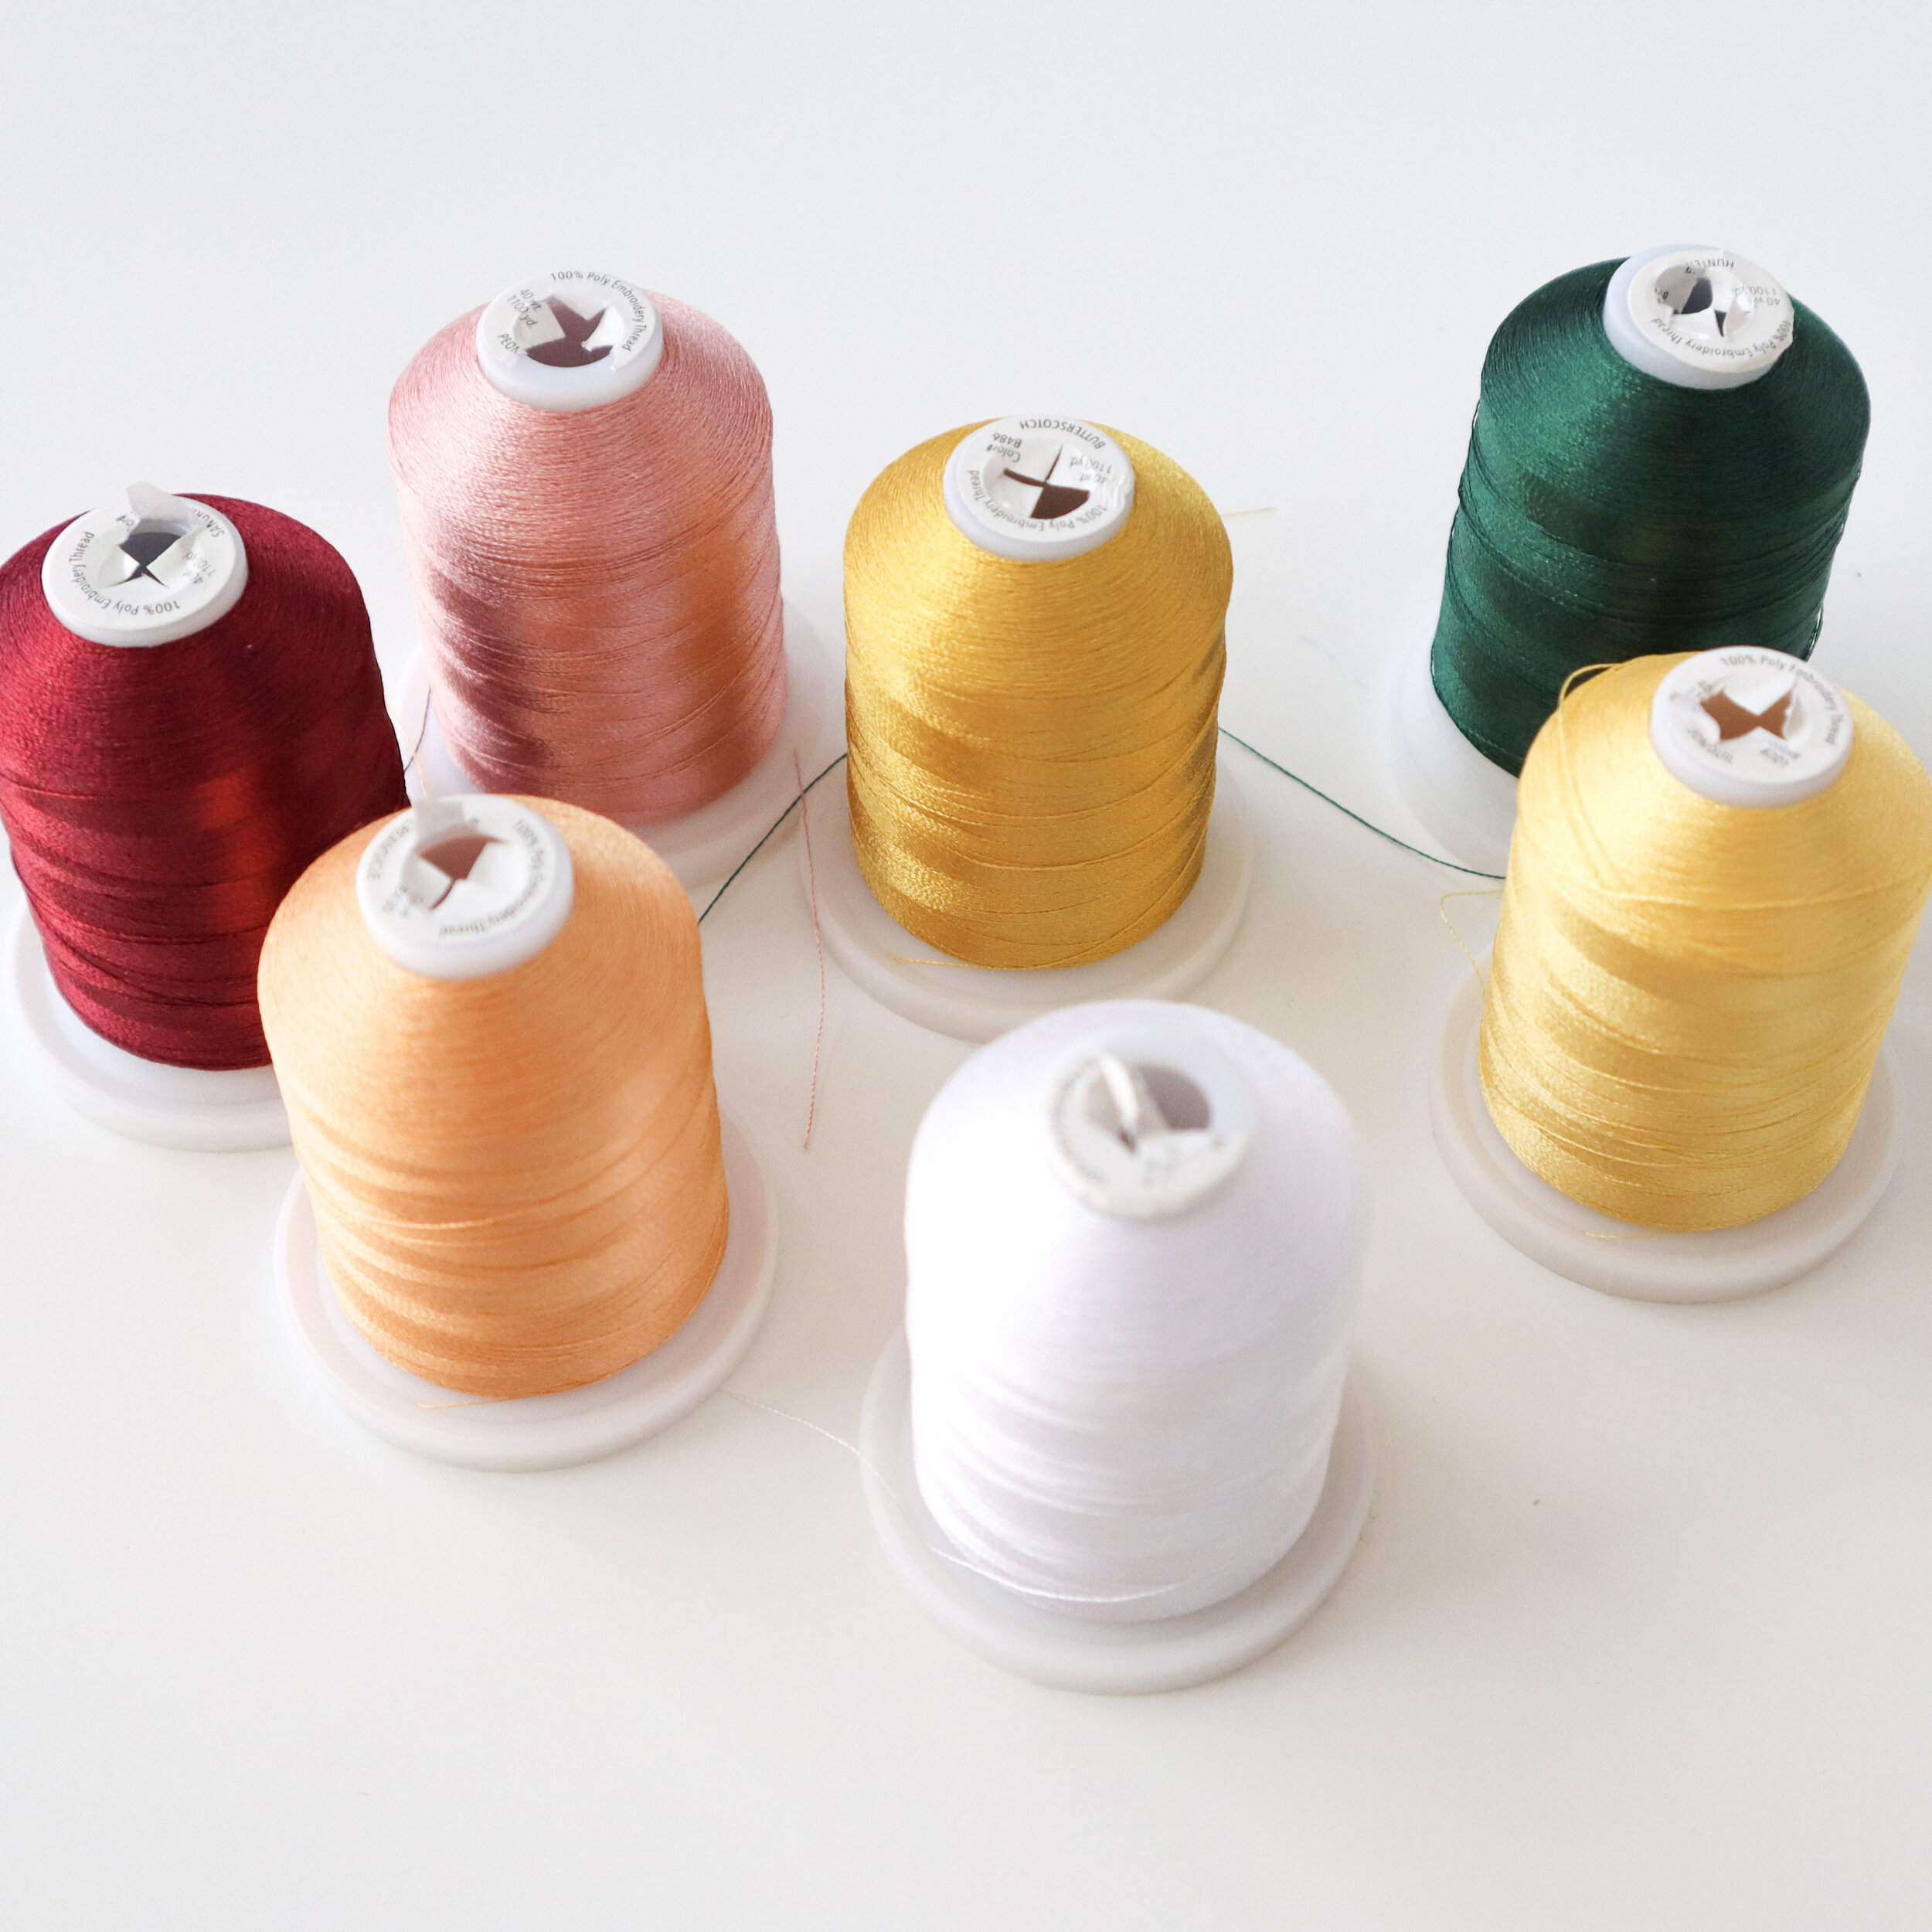 Know Your Thread Types: Cotton, Polyester, and Polycotton